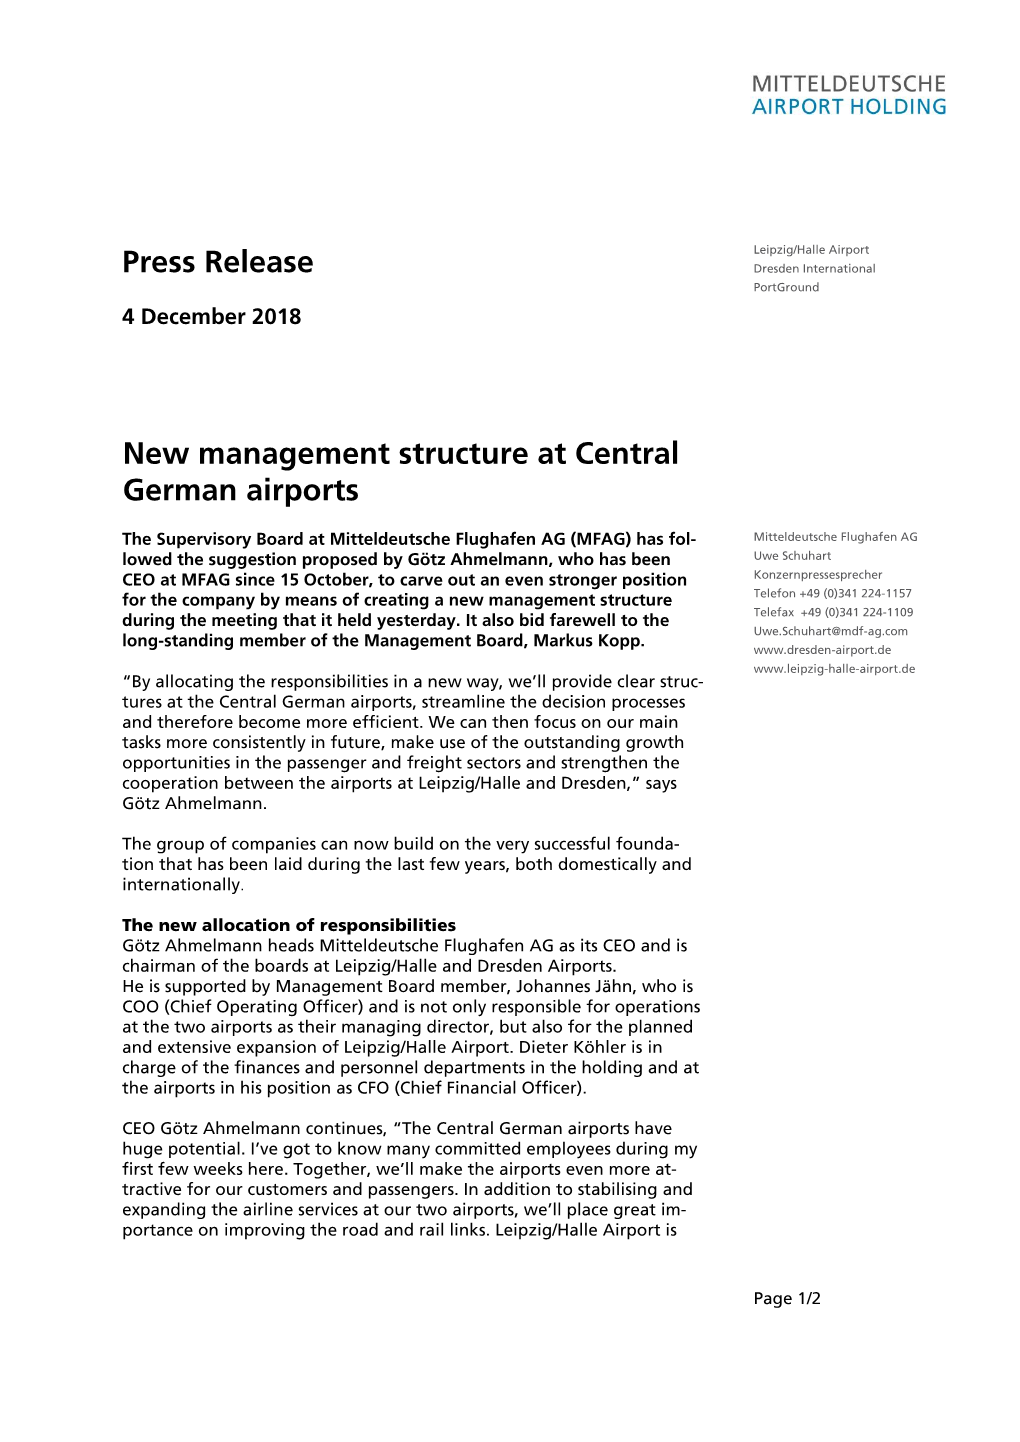 Press Release New Management Structure at Central German Airports